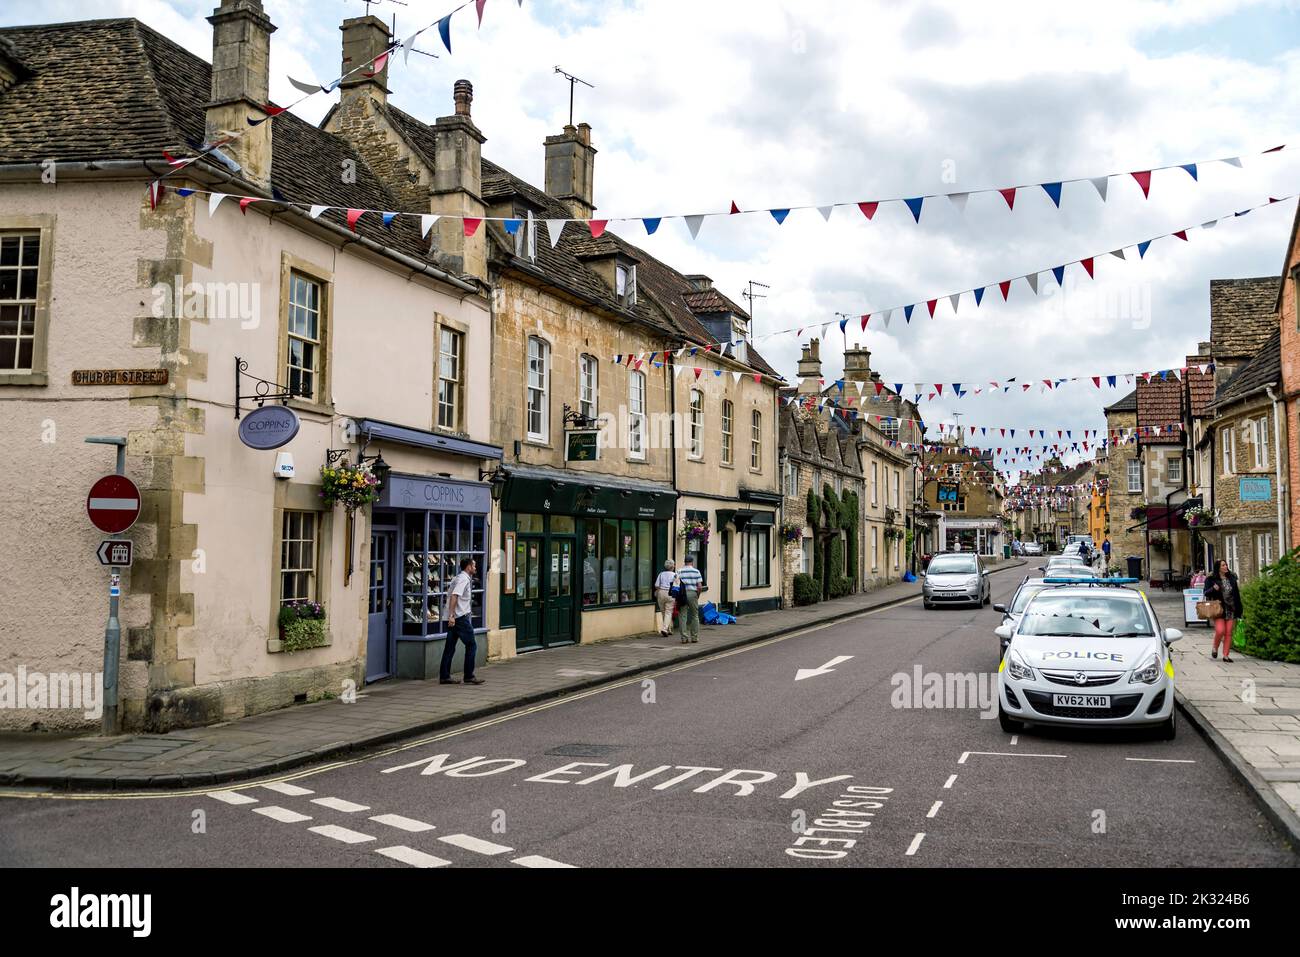 CORSHAM, UK: a person rides his bike in a street in Corsham, an old village in south of England on July, 17, 2015 in Corsham, UK Stock Photo